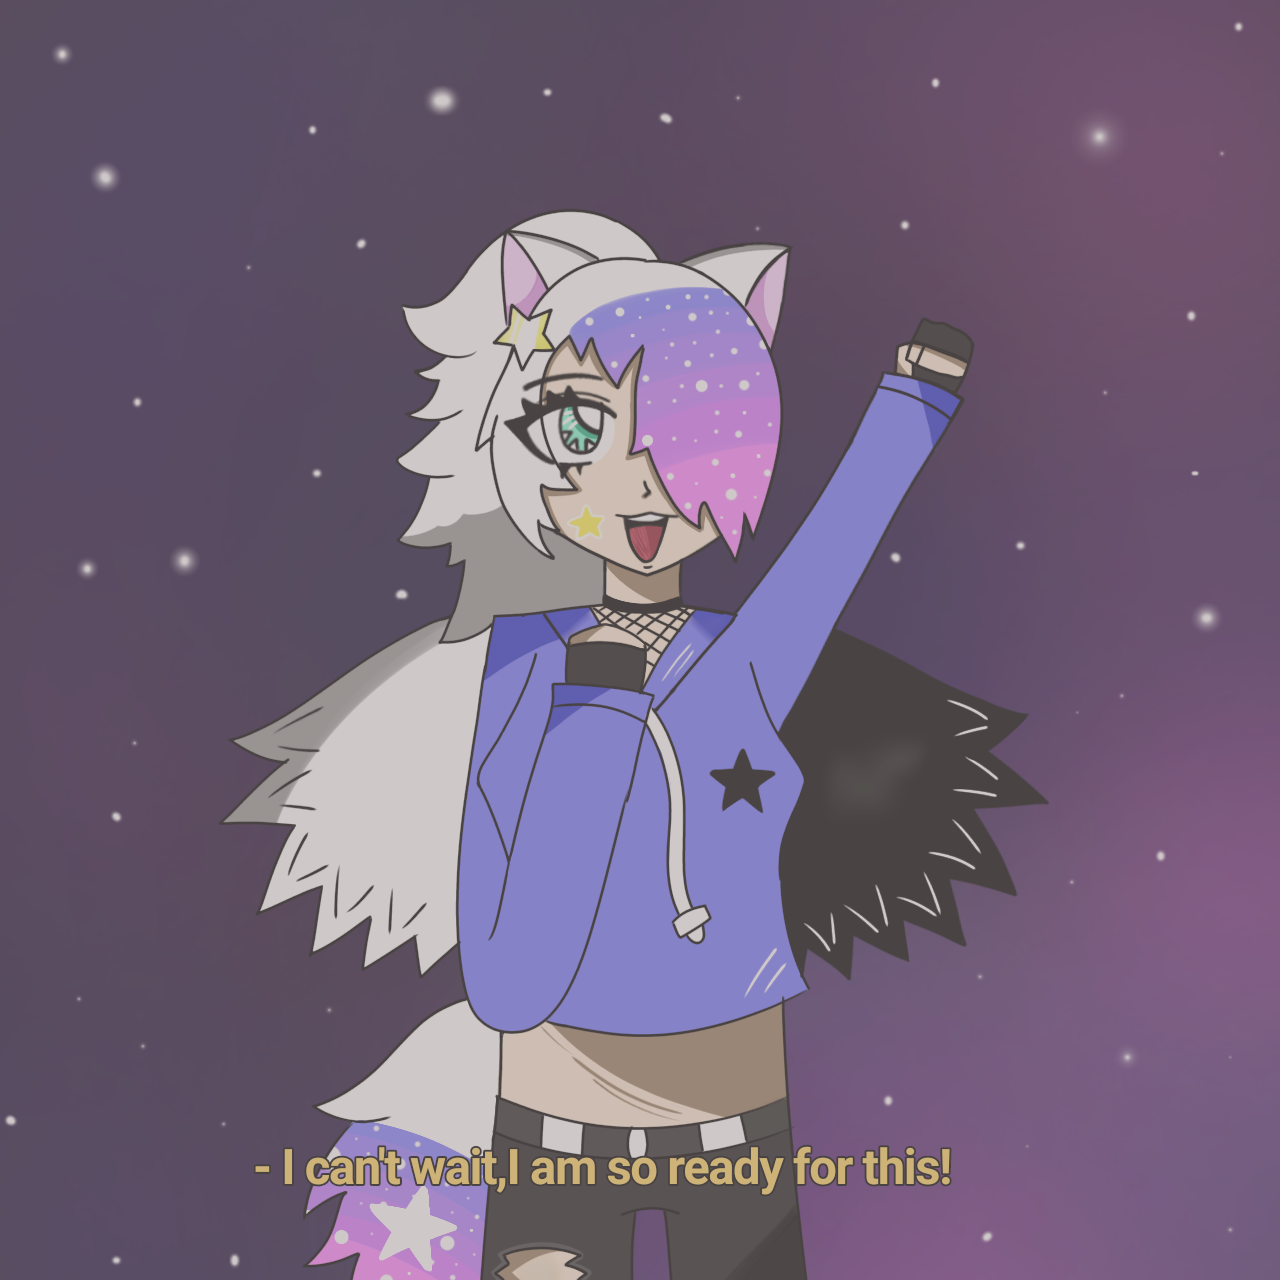 me in dreamcore picrew by Xxgalax on DeviantArt